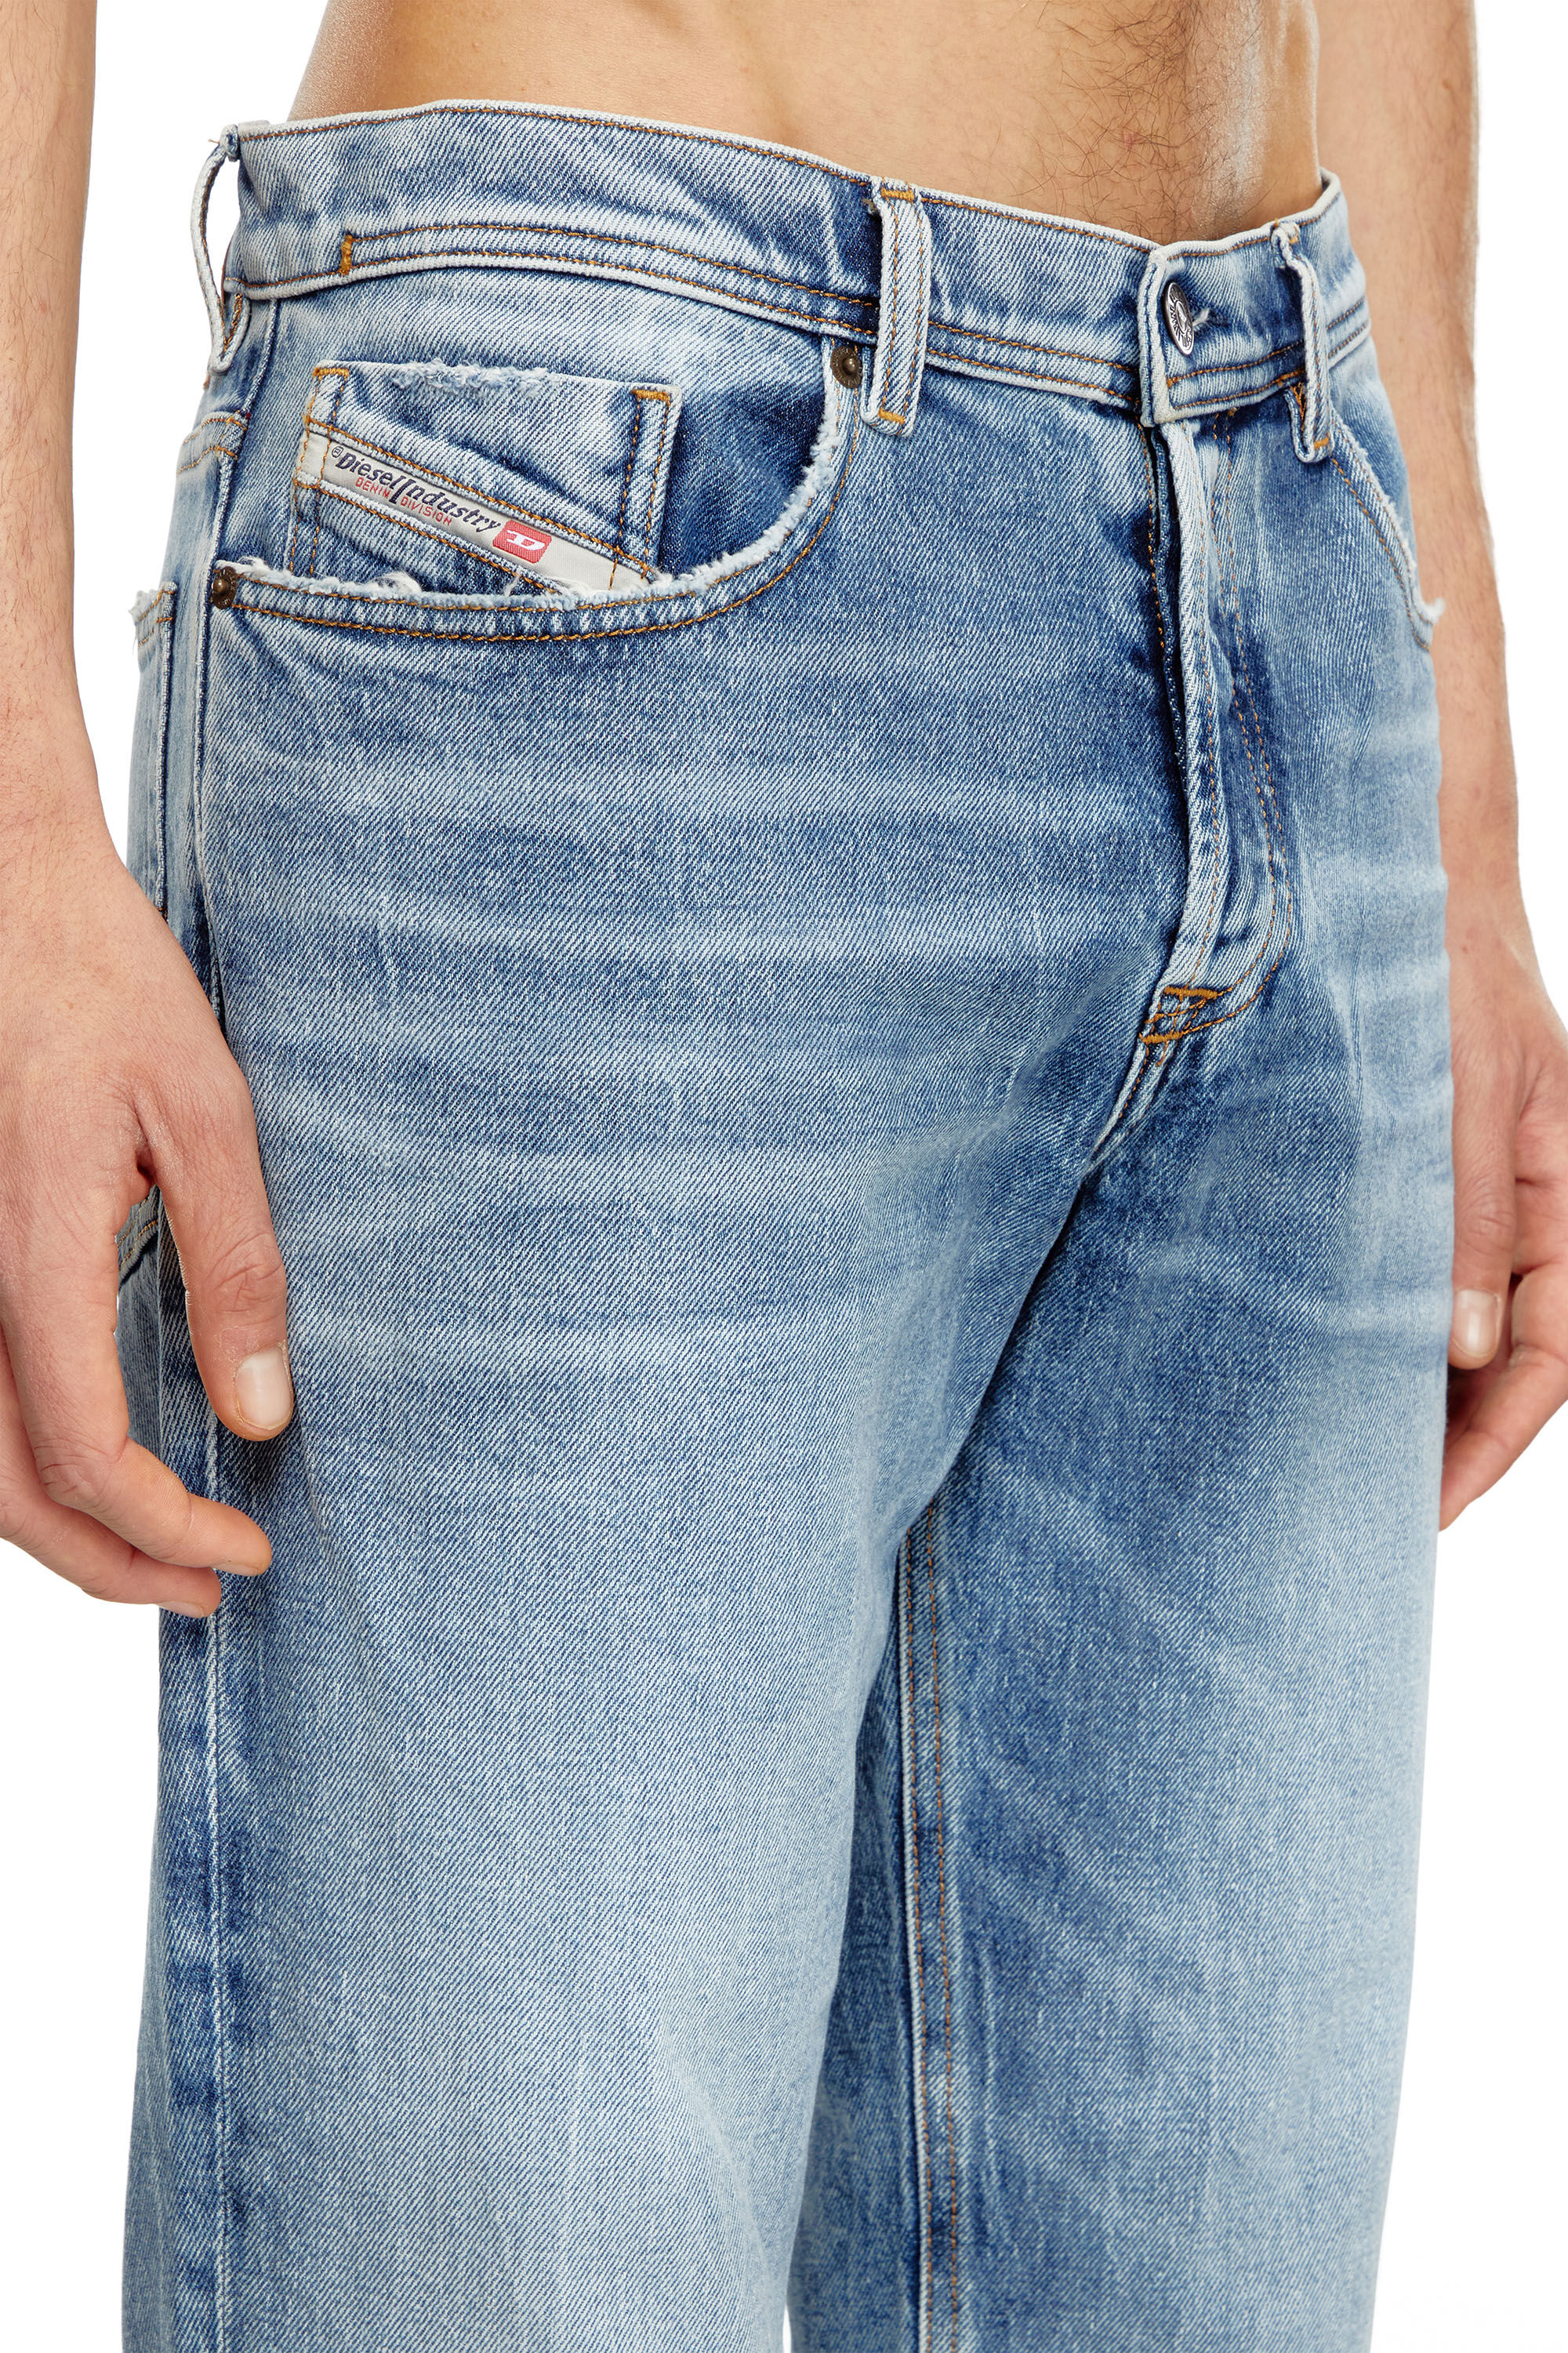 Diesel - Tapered Jeans 2023 D-Finitive 09J54, Hombre Tapered Jeans - 2023 D-Finitive in Azul marino - Image 5